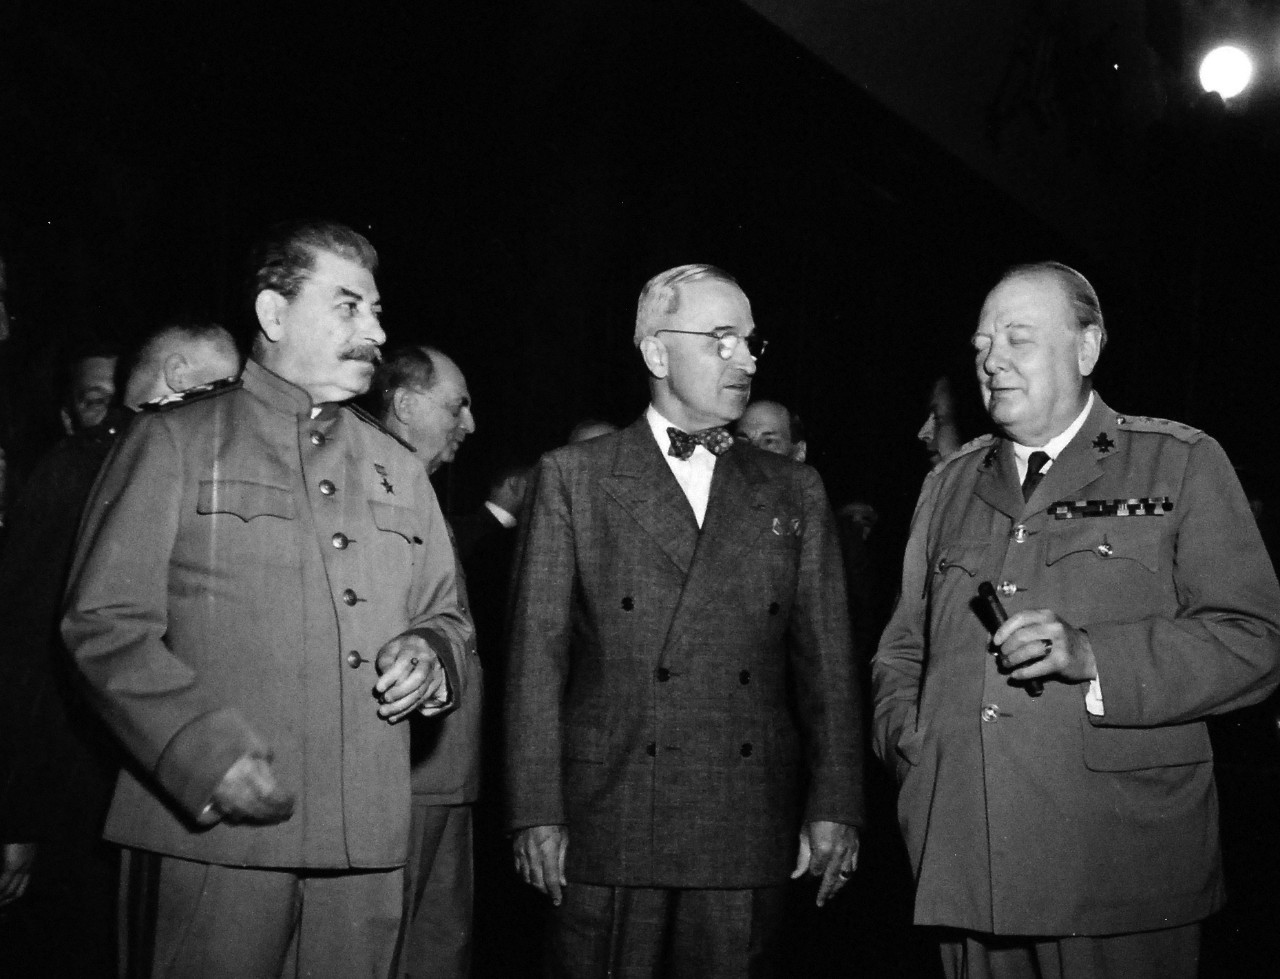 80-G-49985:  Potsdam Conference, July-August 1945.   In between conference sessions, President Harry S. Truman makes a quick tour of Berlin, Germany.   Shown: On the outskirts of the city, he inspects the Second Armored Division.  Shortly following this inspection, he presented the Division with the Presidential Unit Citation.  Photographed by CPhoM Wm. Belknap, received July 16, 1945.  Official U.S. Navy Photograph, now in the collections of the National Archives.  (2016/02/23).